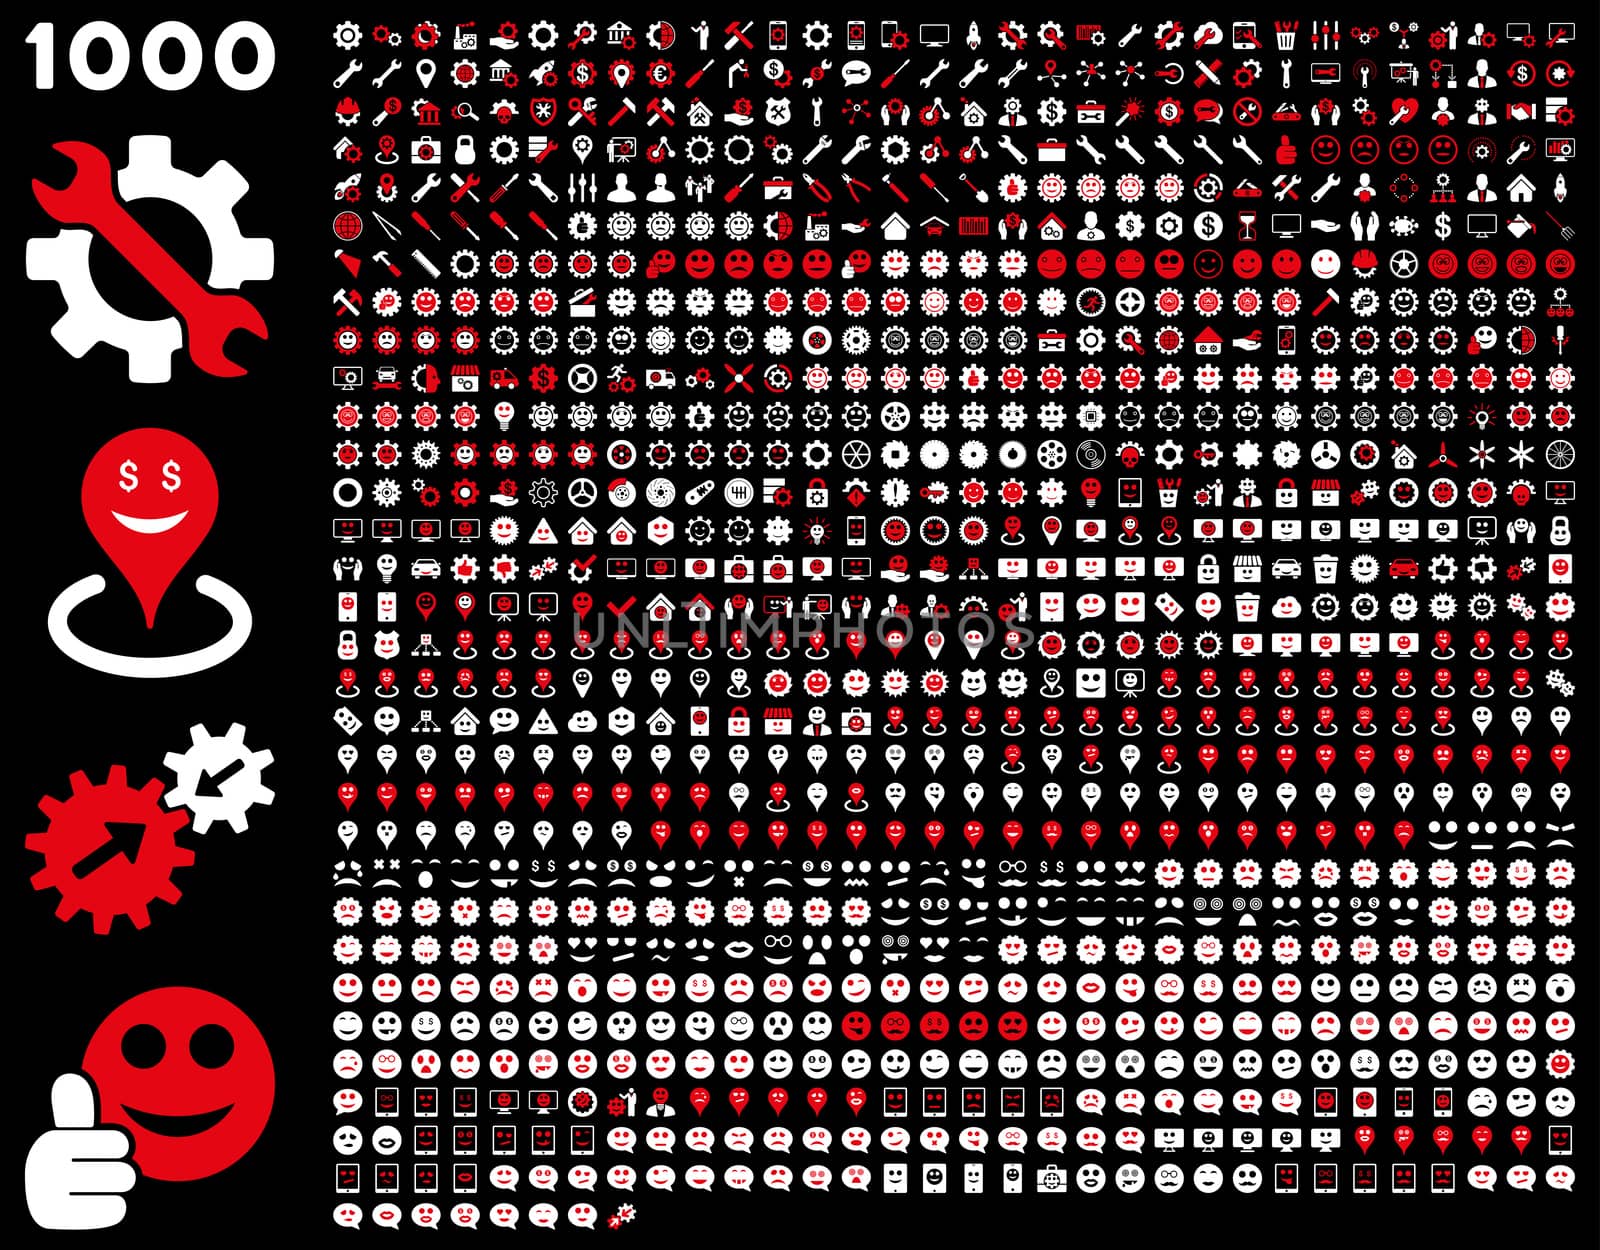 1000 tools, gears, smiles, map markers, mobile icons. Glyph set style: bicolor flat images, red and white symbols, isolated on a black background.